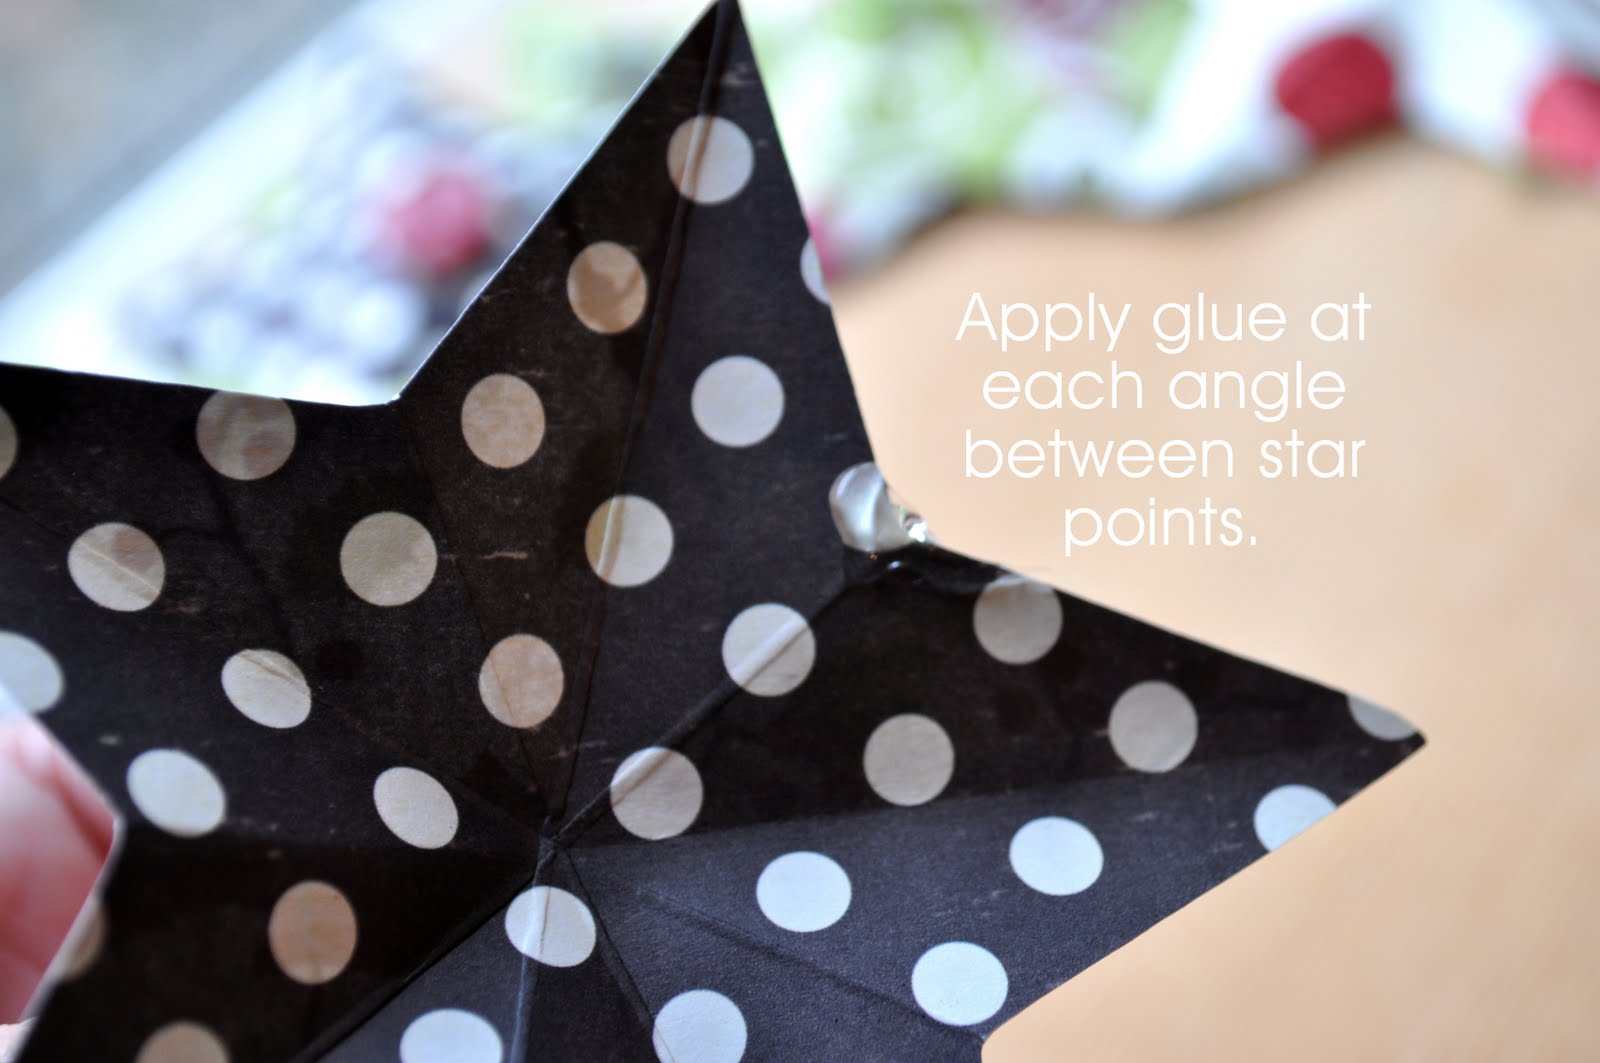 How to Make a 3D Paper Star Wreath